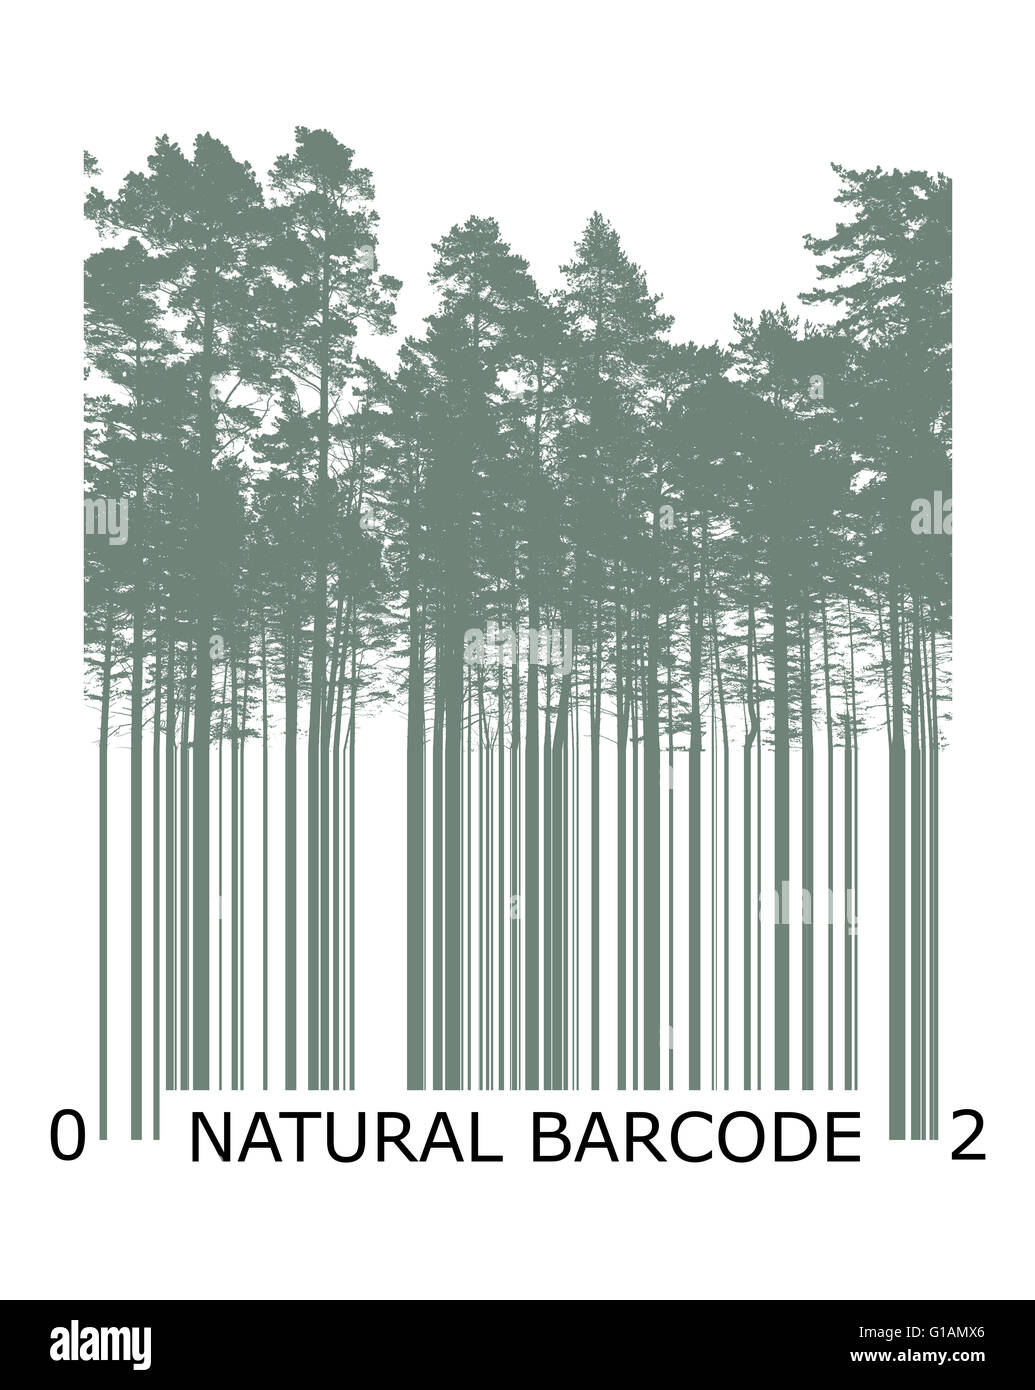 Natural product bar code concept with trees silhouettes Stock Photo